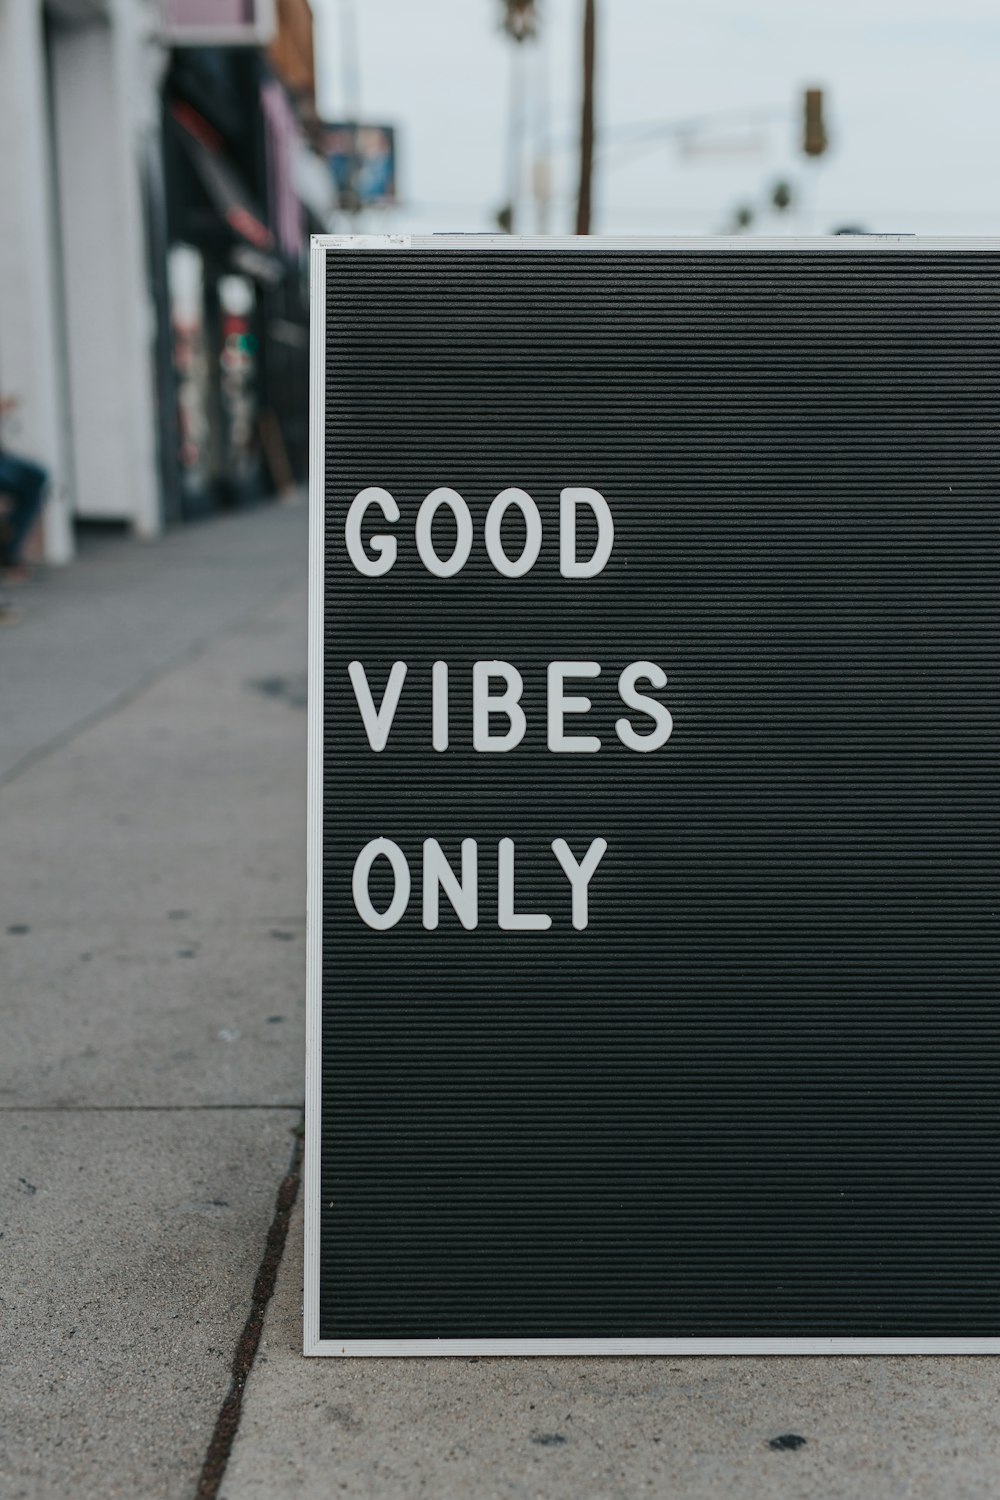 Sidewalk sign displaying "Good Vibes Only" on Sunset Strip